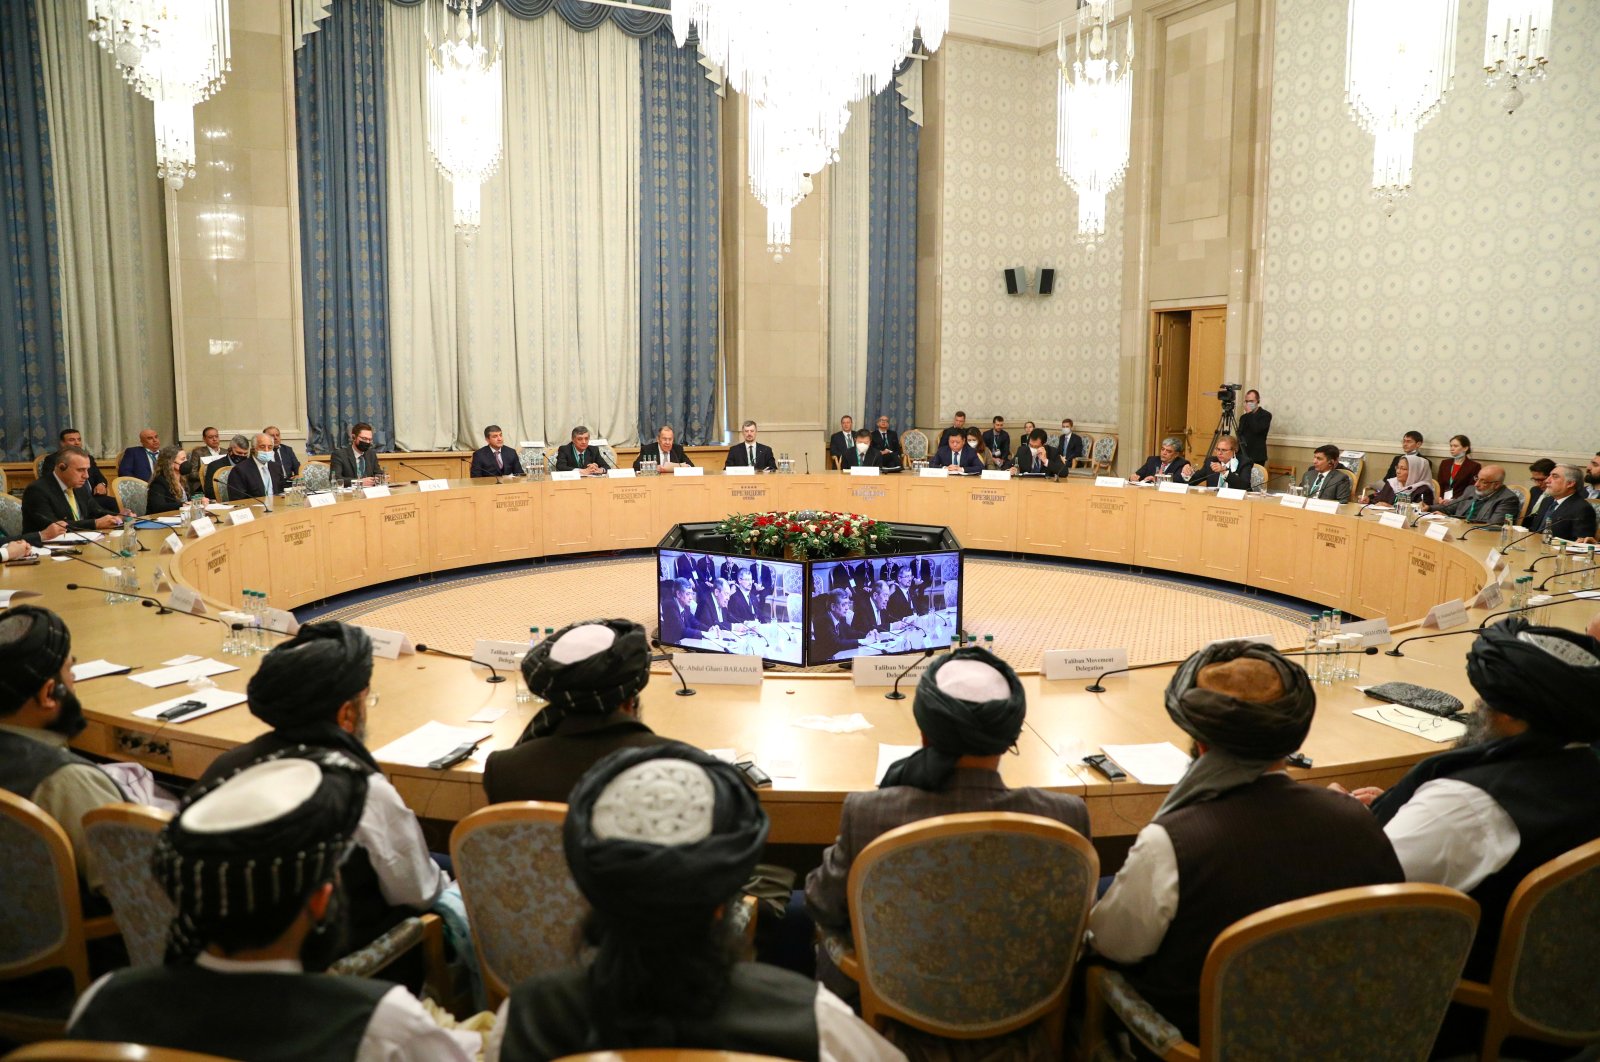 Officials attend the Afghan peace conference in Moscow, Russia, March 18, 2021. (Reuters Photo)